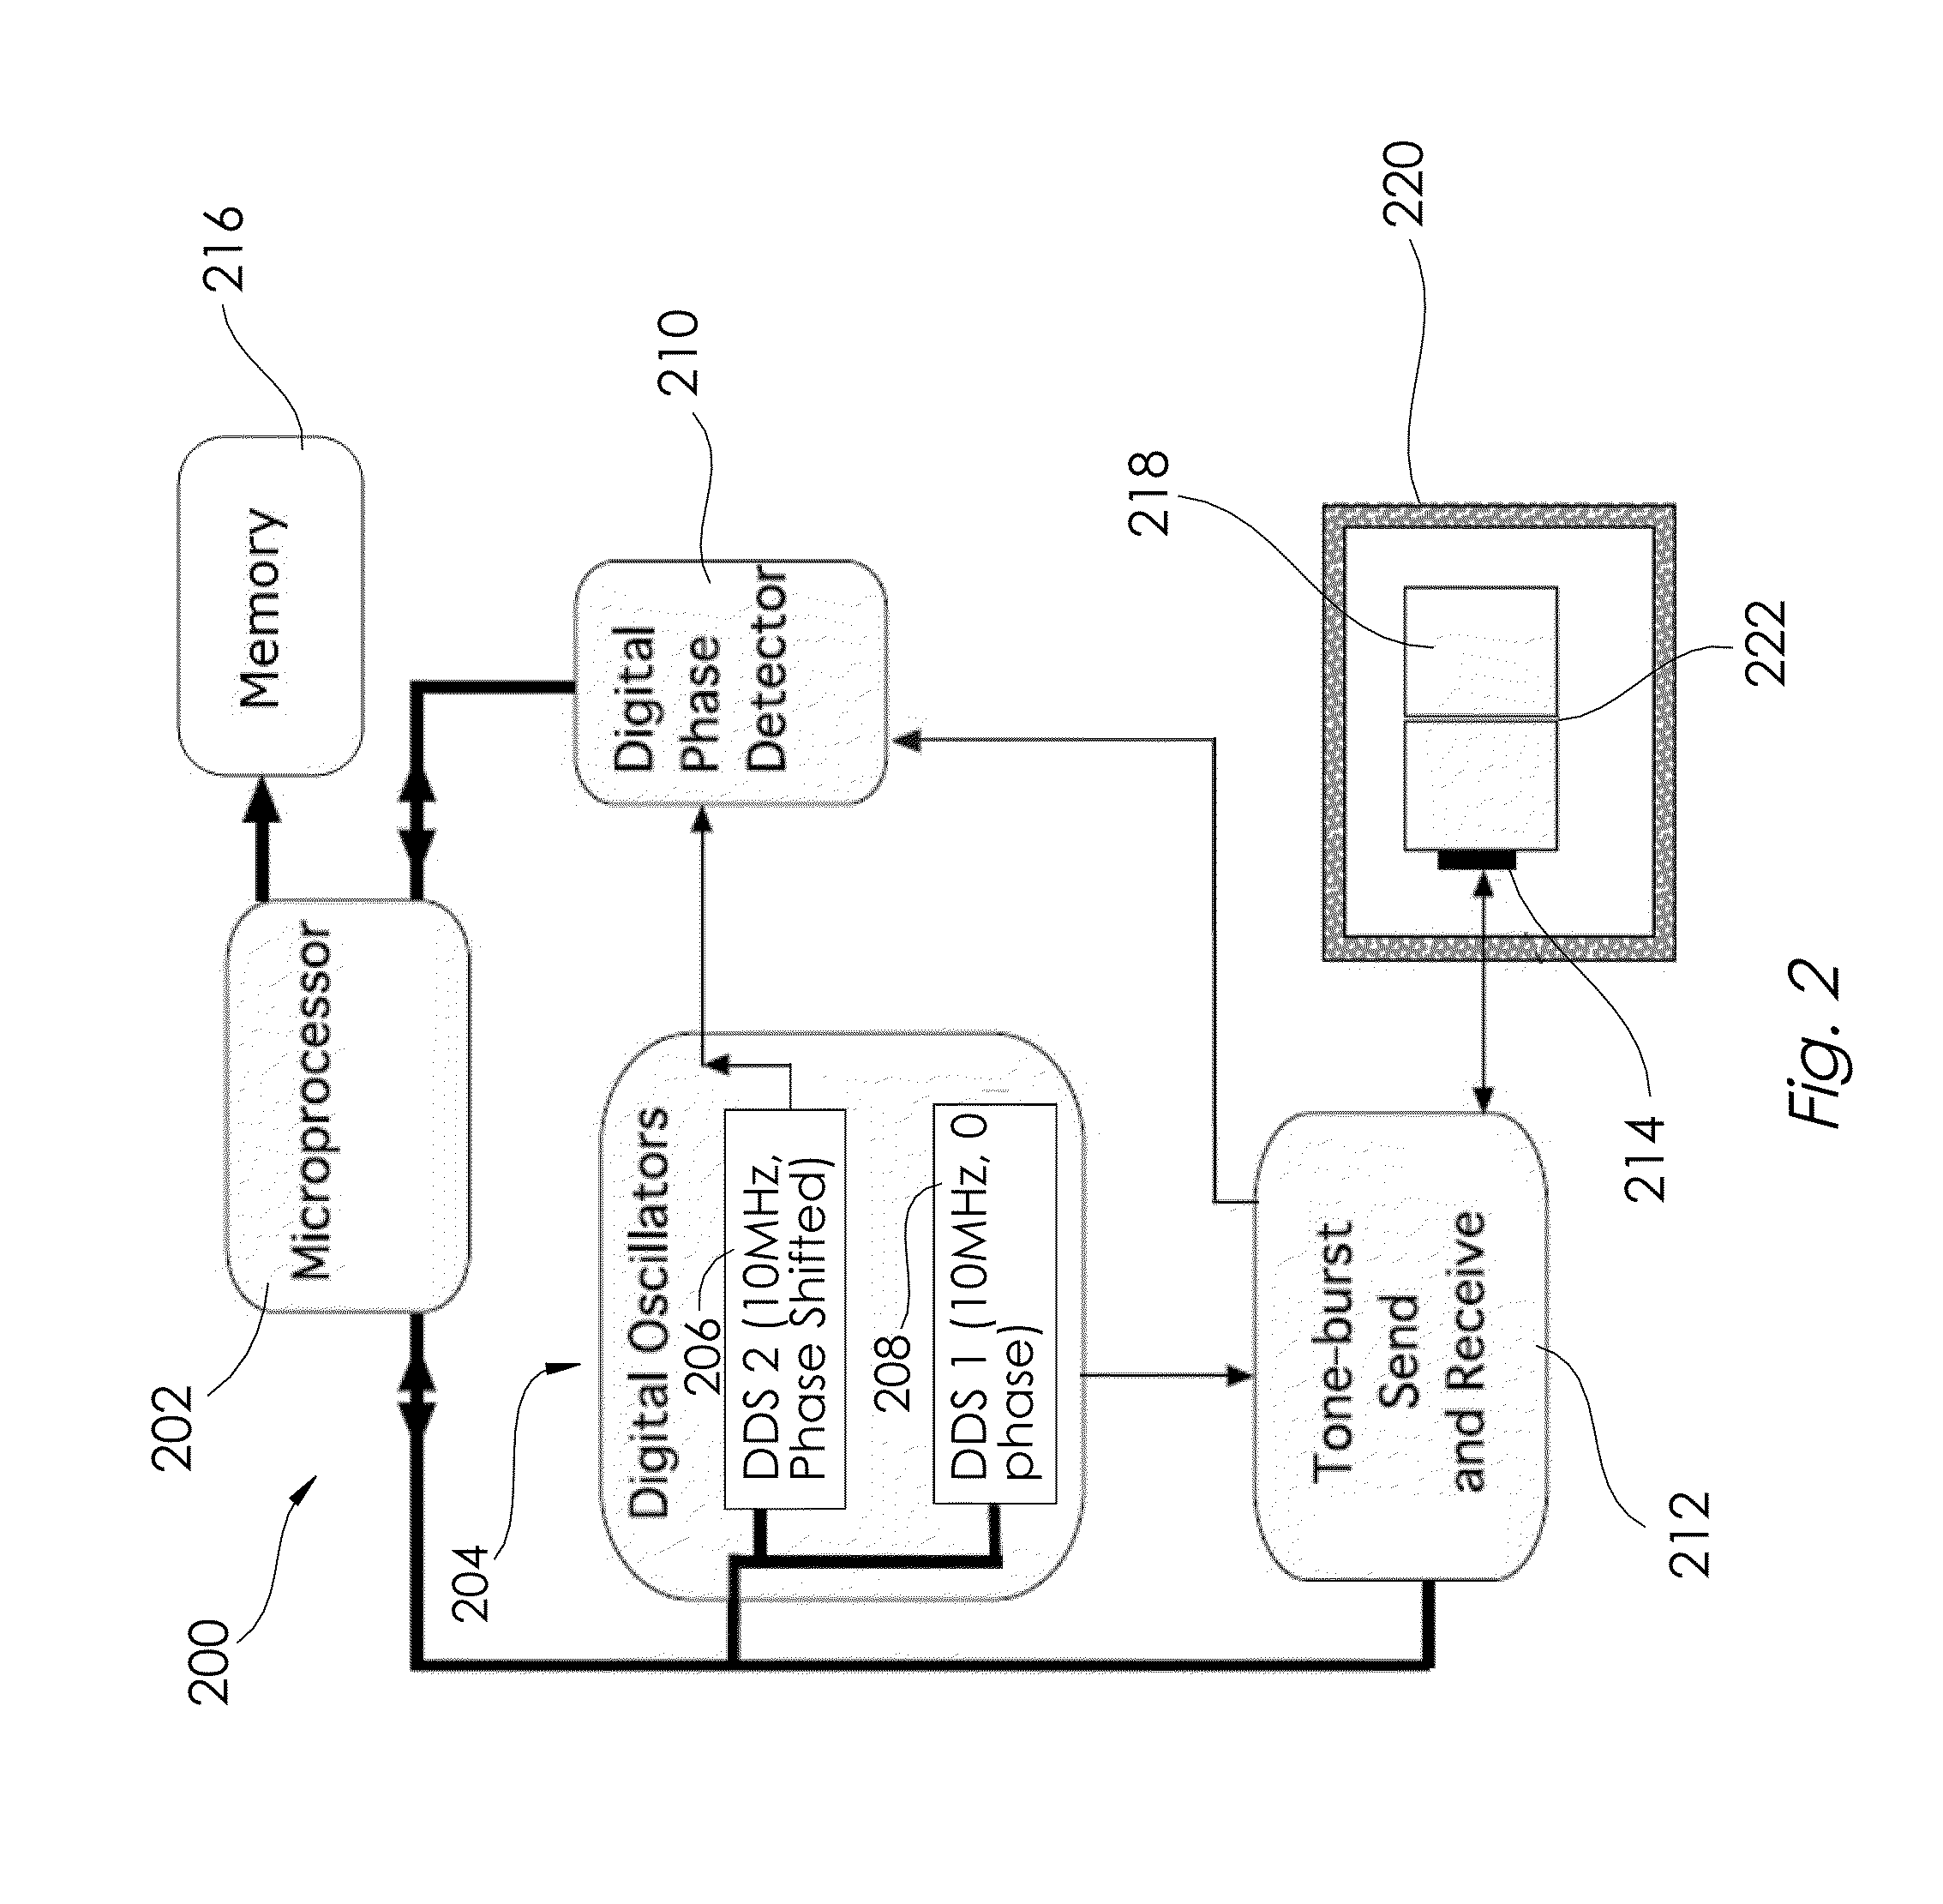 Systems and methods for measuring phase dynamics and other properties